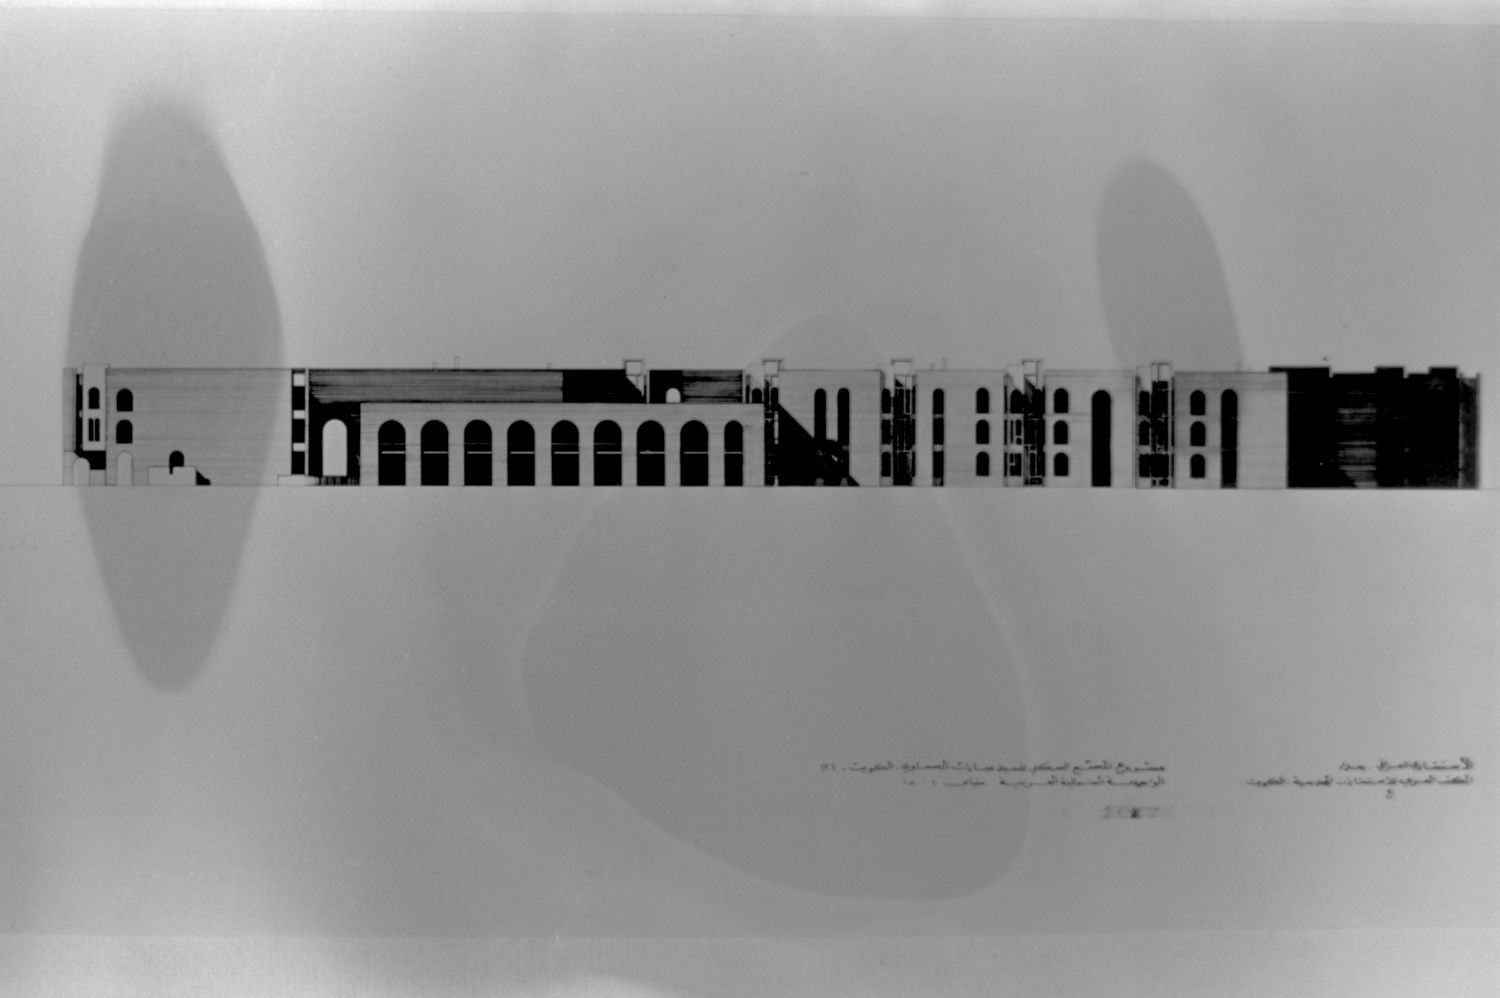 Northwest elevation (from an early version of plan not adopted in final construction).